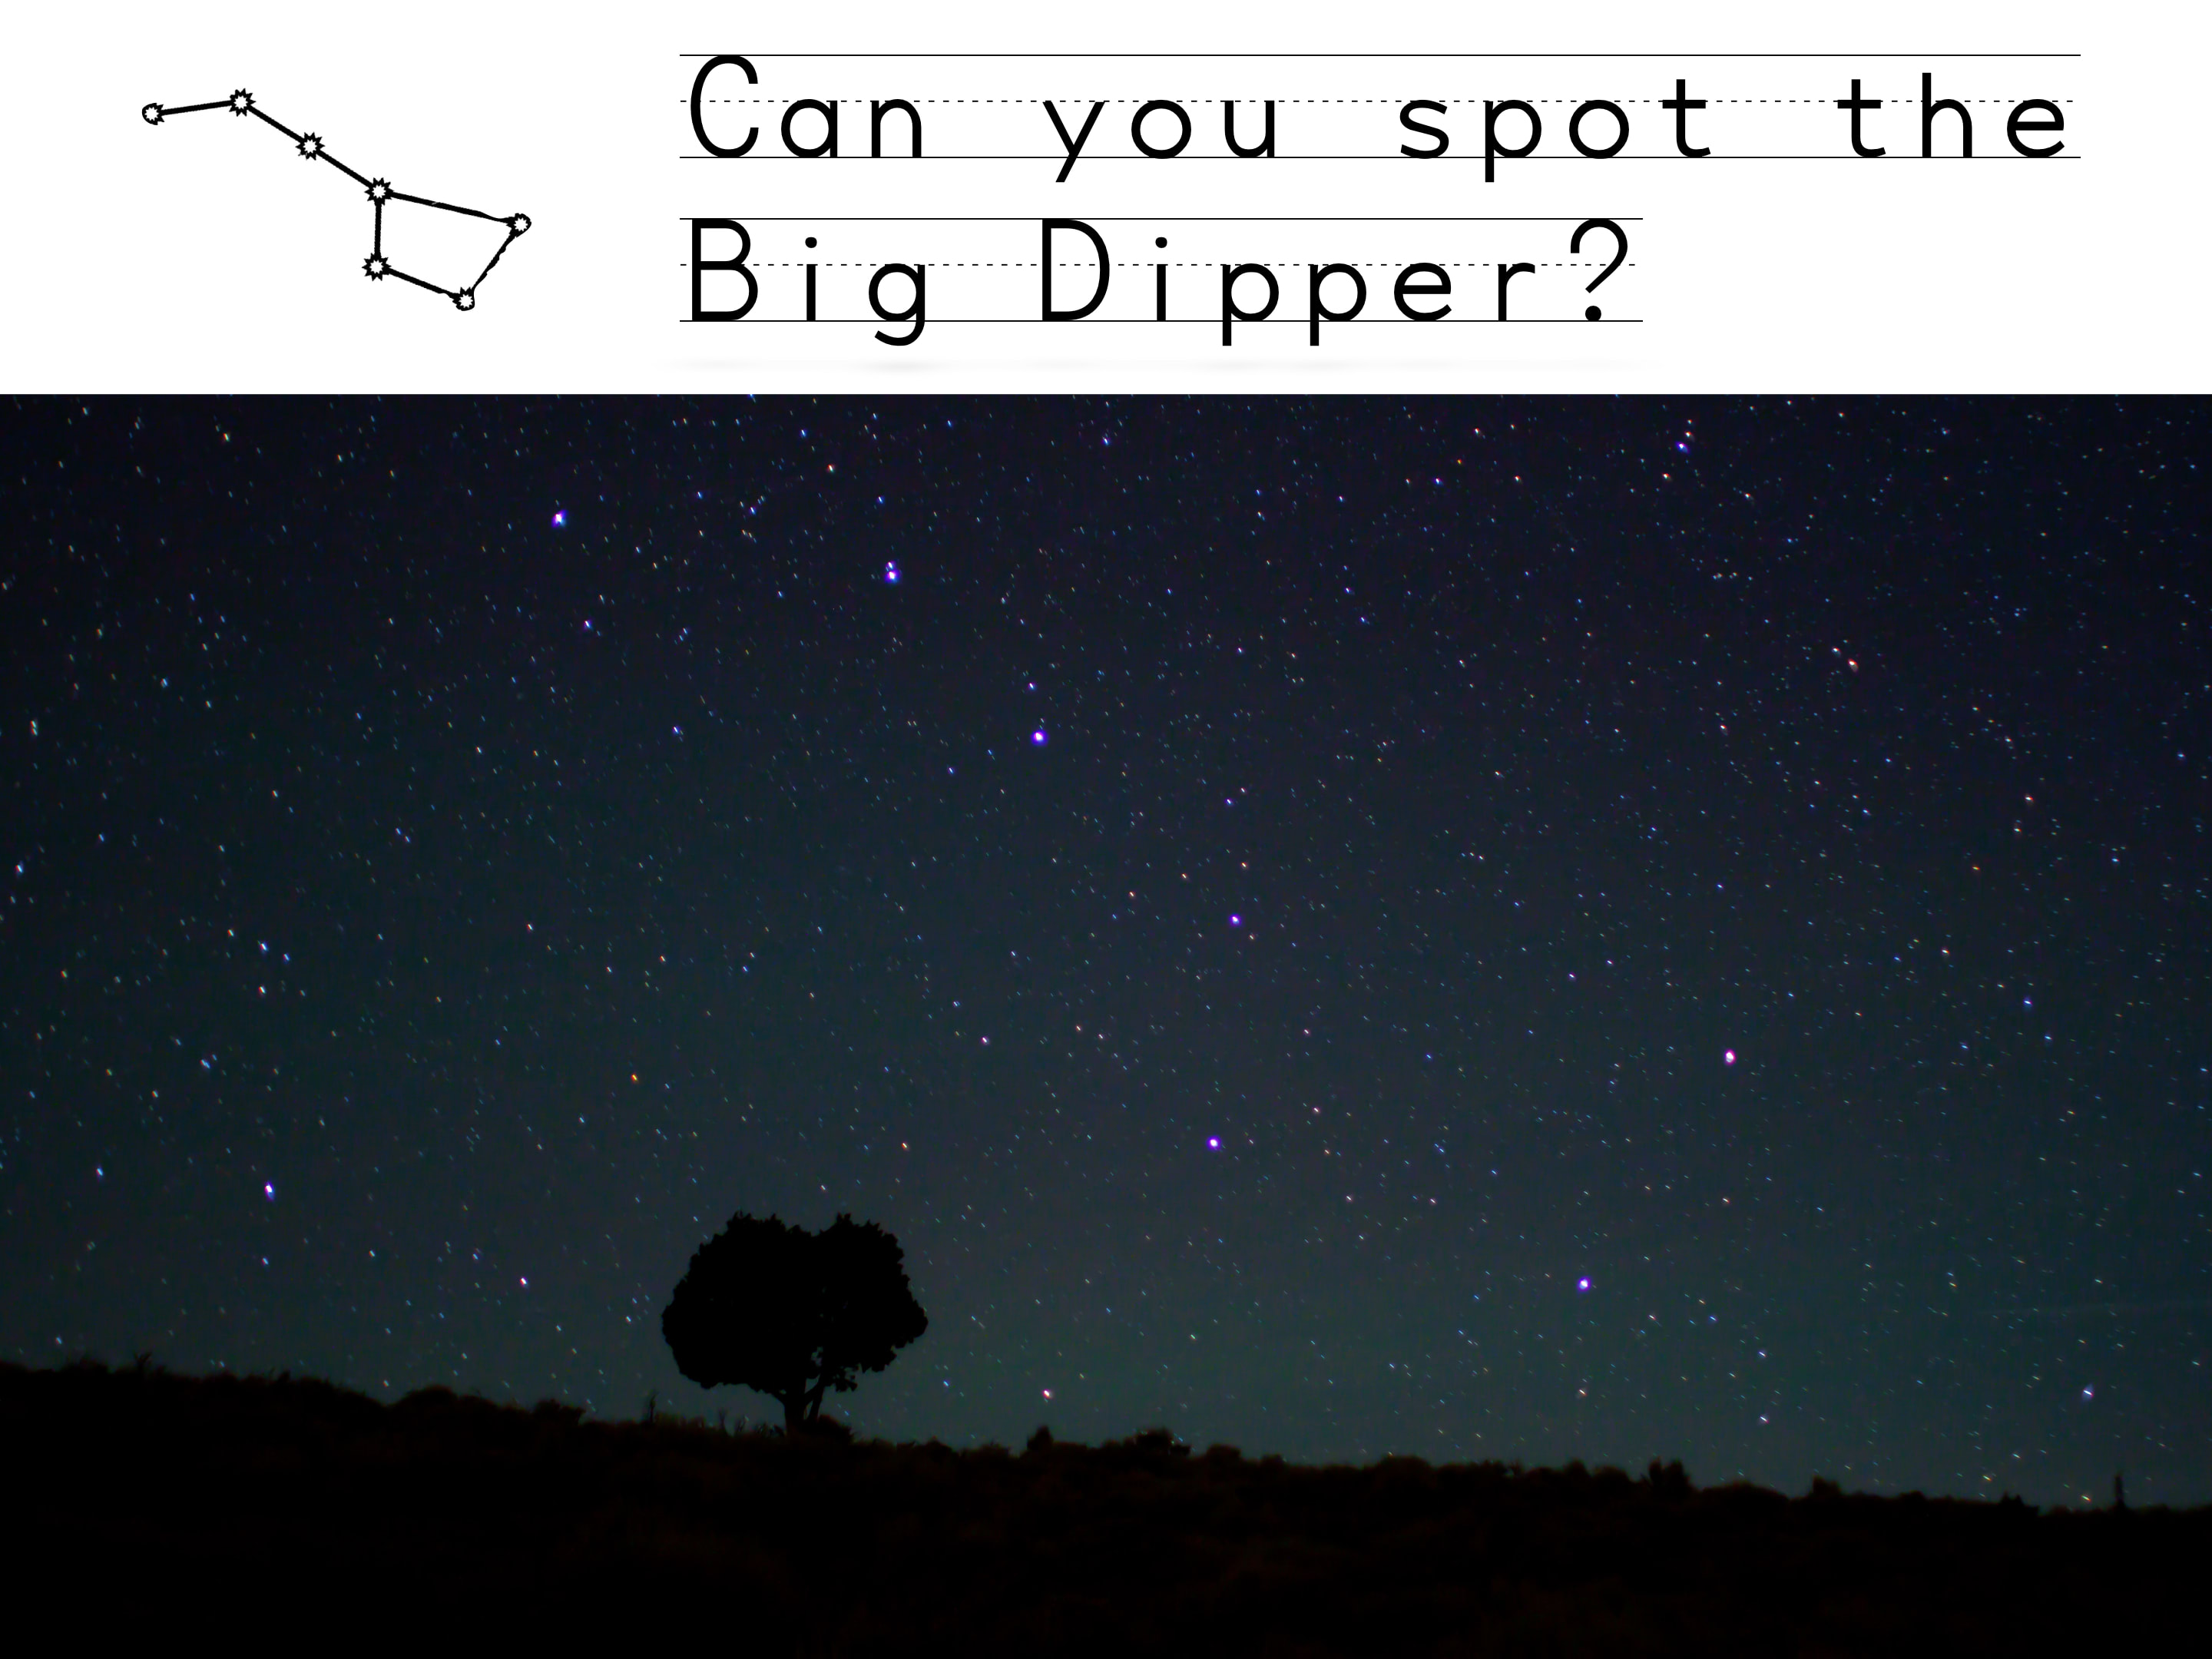 Search for Big Dipper